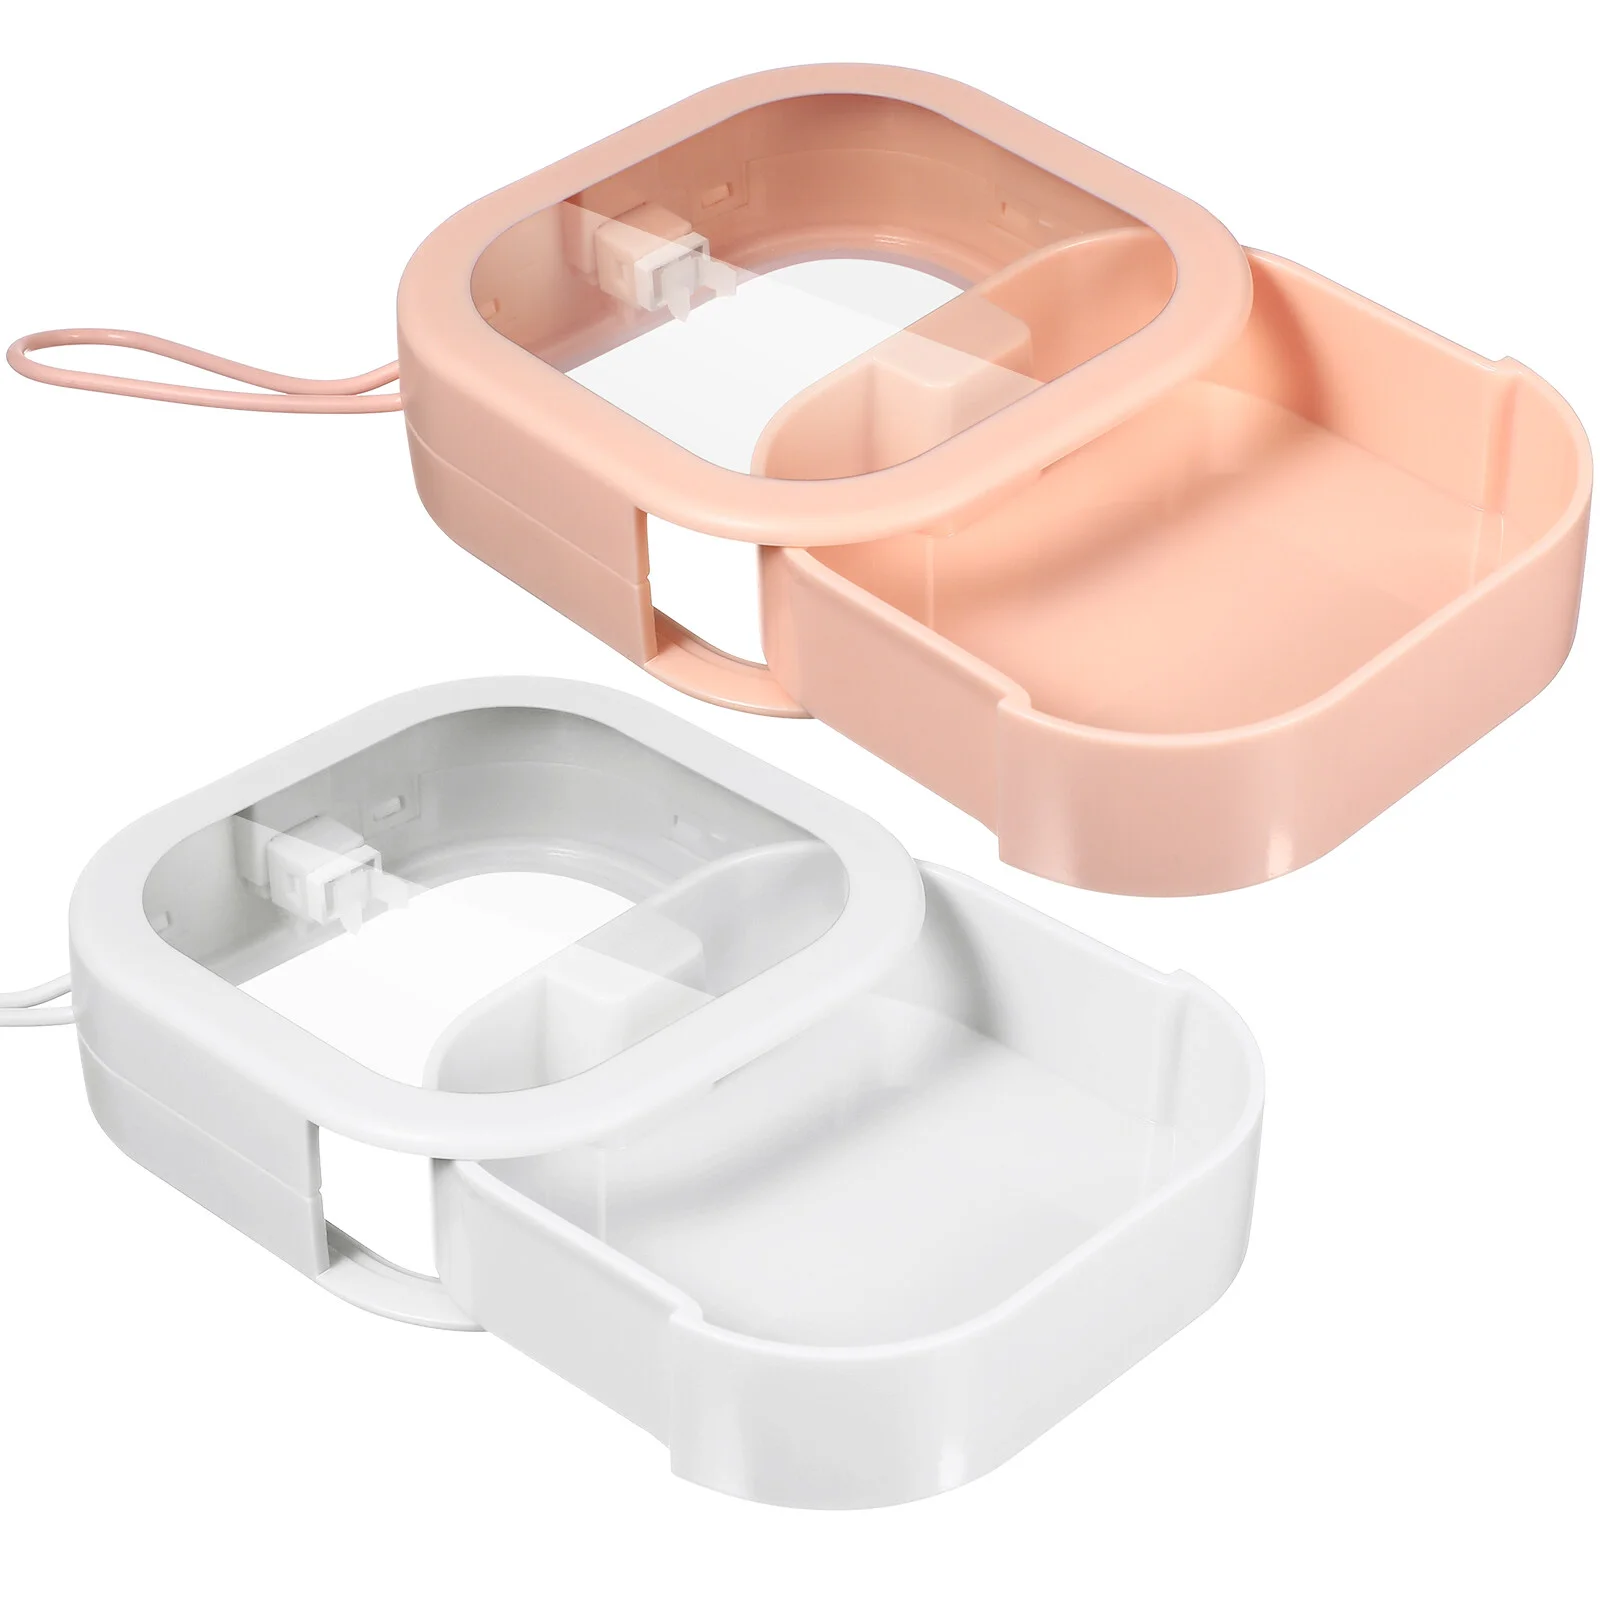 

2 Pcs Desktop Organizers Small Multifunctional Storage Boxes False Teeth Containers